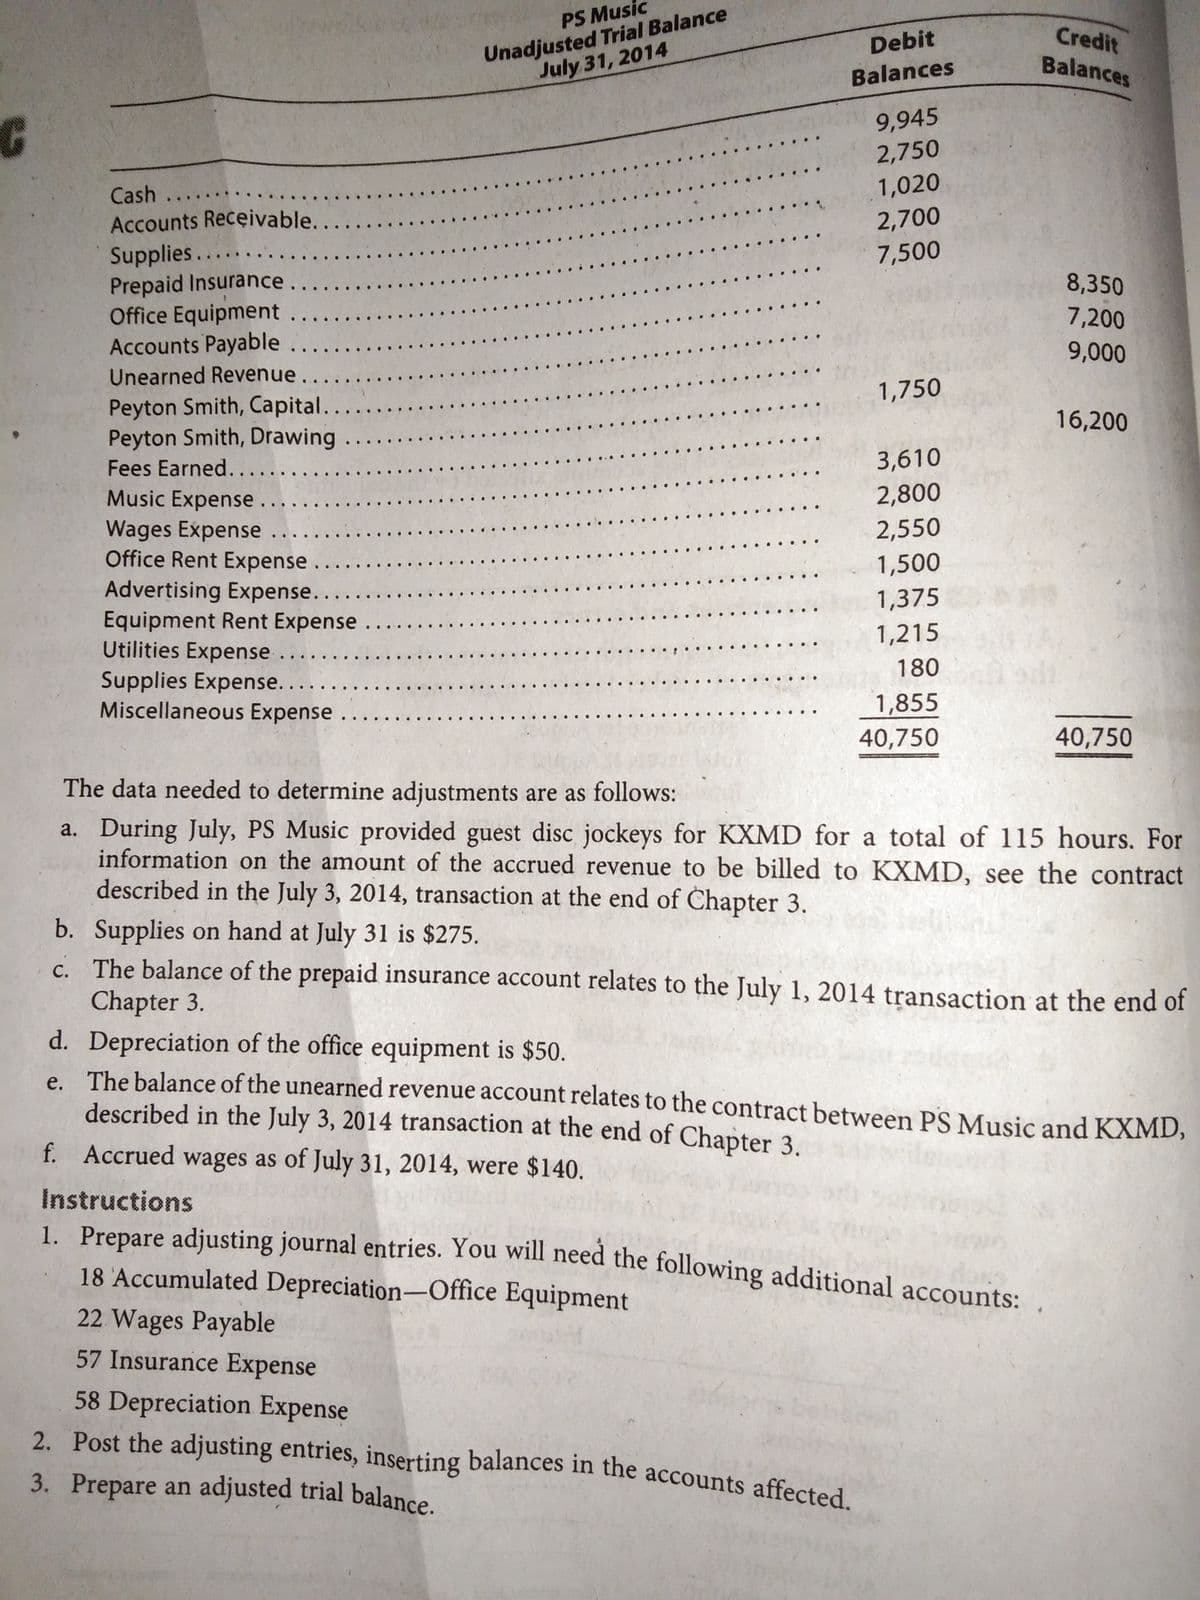 2. Post the adjusting entries, inserting balances in the accounts affected.
Unadjusted Trial Balance
July 31, 2014
PS Music
Credit
Debit
Balances
Balances
9,945
2,750
Cash ...
1,020
Accounts Receivable.
2,700
Supplies.....
Prepaid Insurance.....
Office Equipment ....
Accounts Payable ......
Unearned Revenue.
7,500
8,350
7,200
9,000
1,750
Peyton Smith, Capital.....
Peyton Smith, Drawing ..
16,200
Fees Earned..
3,610
Music Expense.
2,800
2,550
Wages Expense
Office Rent Expense .
1,500
Advertising Expense..
Equipment Rent Expense.
Utilities Expense ...
Supplies Expense....
Miscellaneous Expense.
1,375
1,215
180
1,855
40,750
40,750
The data needed to determine adjustments are as follows:
a. During July, PS Music provided guest disc jockeys for KXMD for a total of 115 hours. For
information on the amount of the accrued revenue to be billed to KXMD, see the contract
described in the July 3, 2014, transaction at the end of Chapter 3.
b. Supplies on hand at July 31 is $275.
c. The balance of the prepaid insurance account relates to the July 1, 2014 transaction at the end of
Chapter 3.
d. Depreciation of the office equipment is $50.
e The balance of the unearned revenue account relates to the contract between PS Music and KXMD,
described in the July 3, 2014 transaction at the end of Chapter 3.
f. Accrued wages as of July 31, 2014, were $140.
Instructions
1. Prepare adjusting journal entries. You will need the following additional accounts:
18 Accumulated Depreciation-Office Equipment
22 Wages Payable
57 Insurance Expense
58 Depreciation Expense
2. Post the adjusting entries, inserting balances in the accounts affected
3. Prepare an adjusted trial balance.
